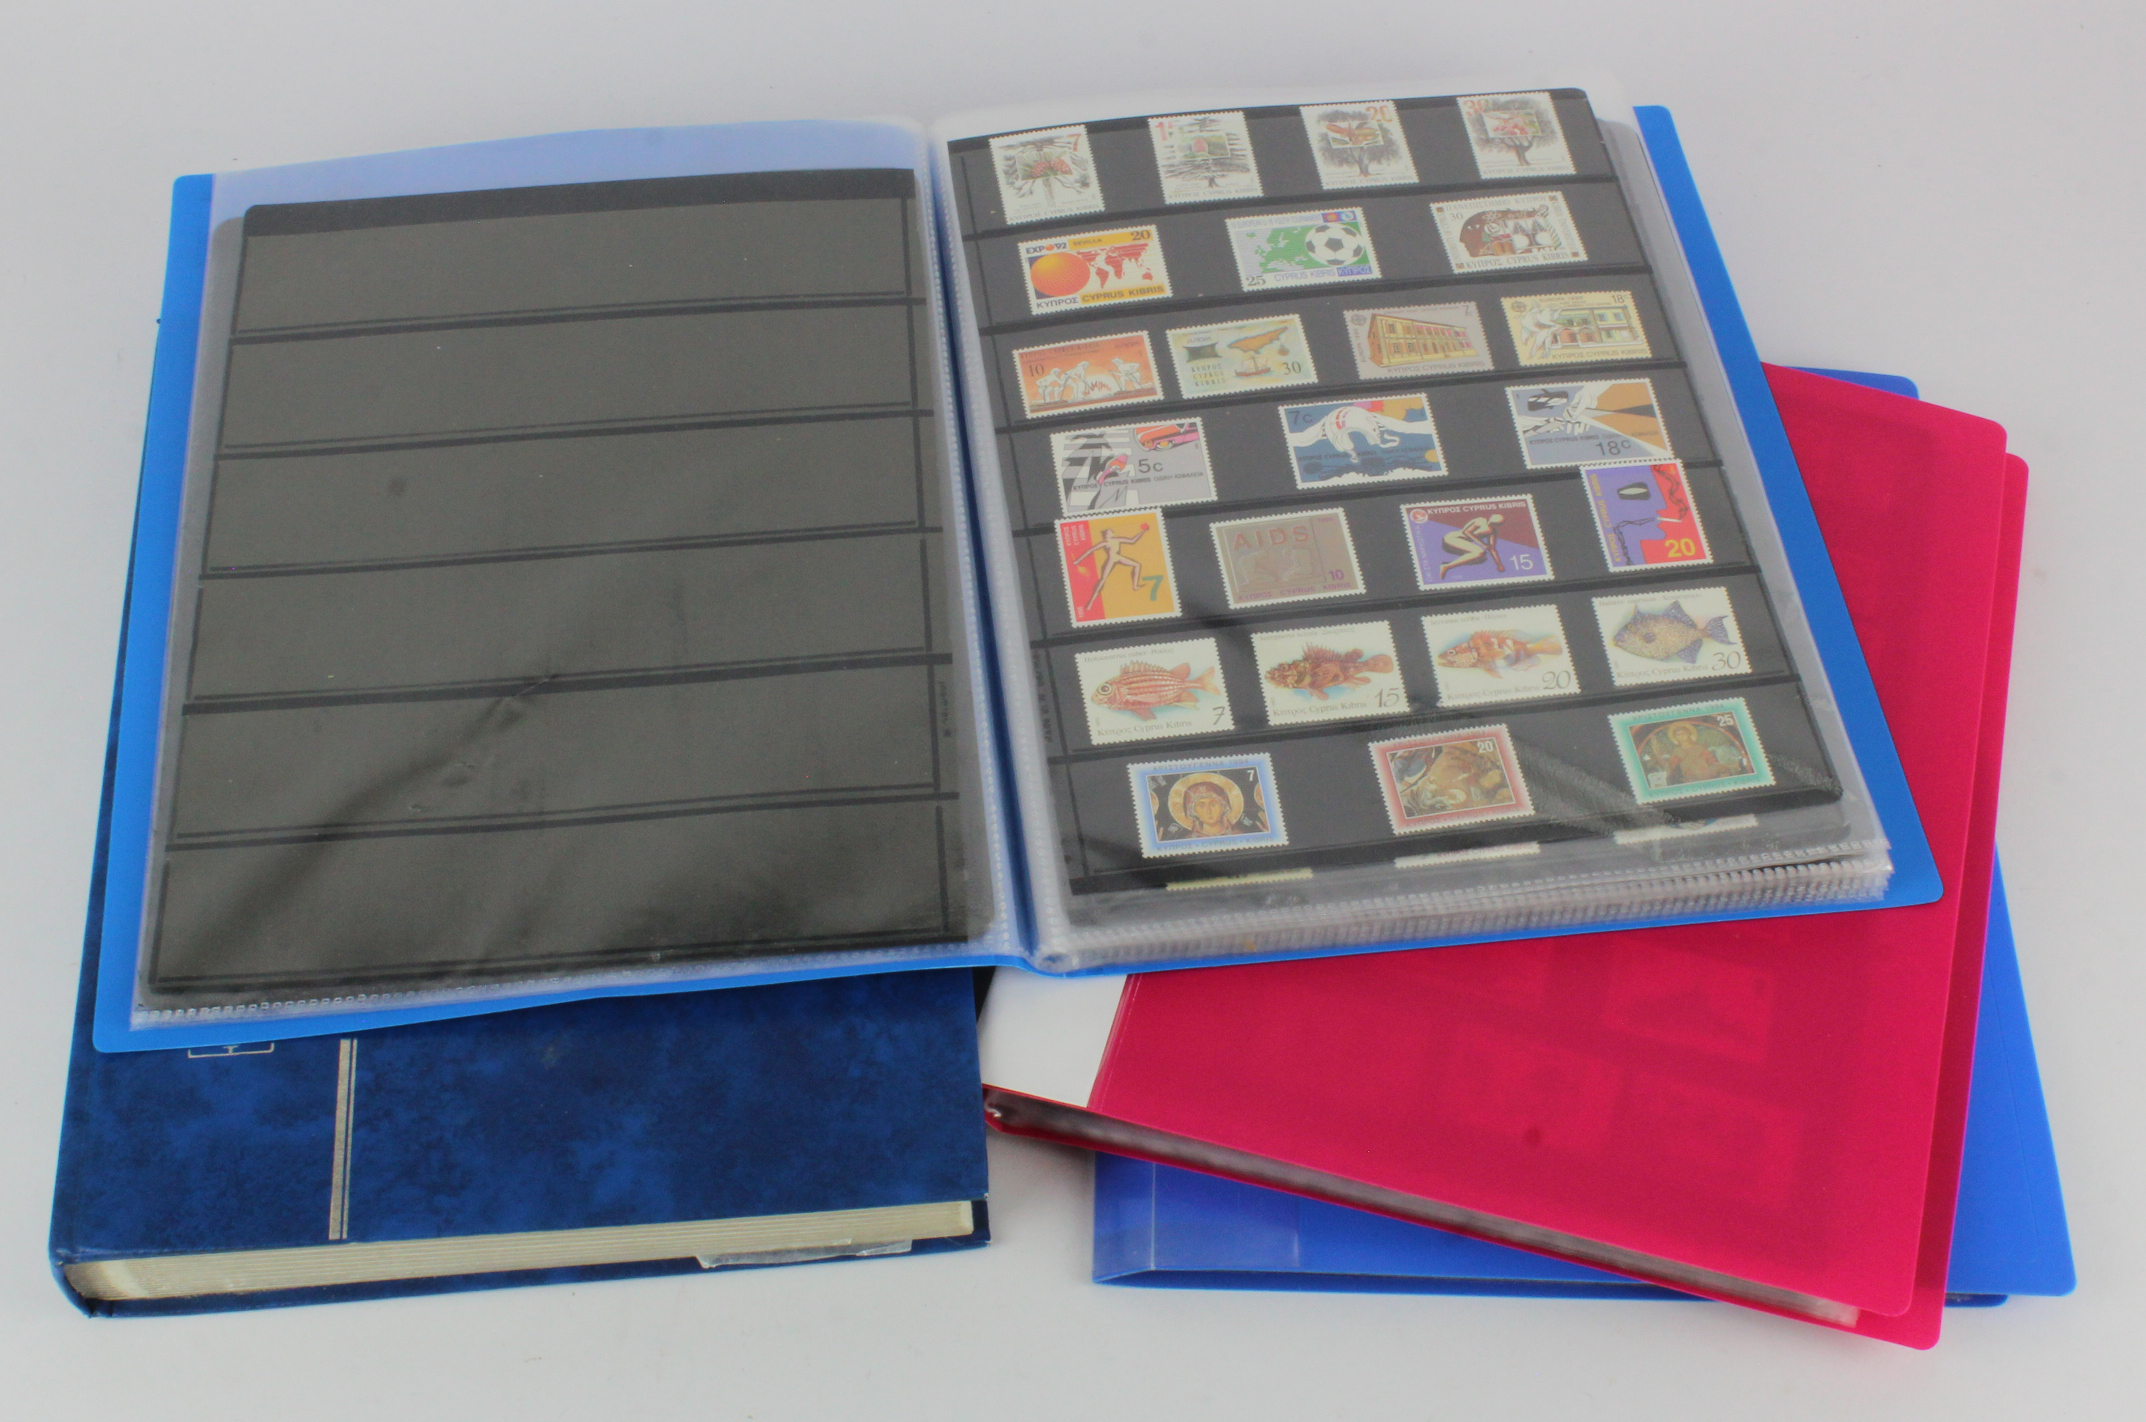 Folders of stamps on stocksheets various, blue stockbook and folder of duplicated mint Russia,